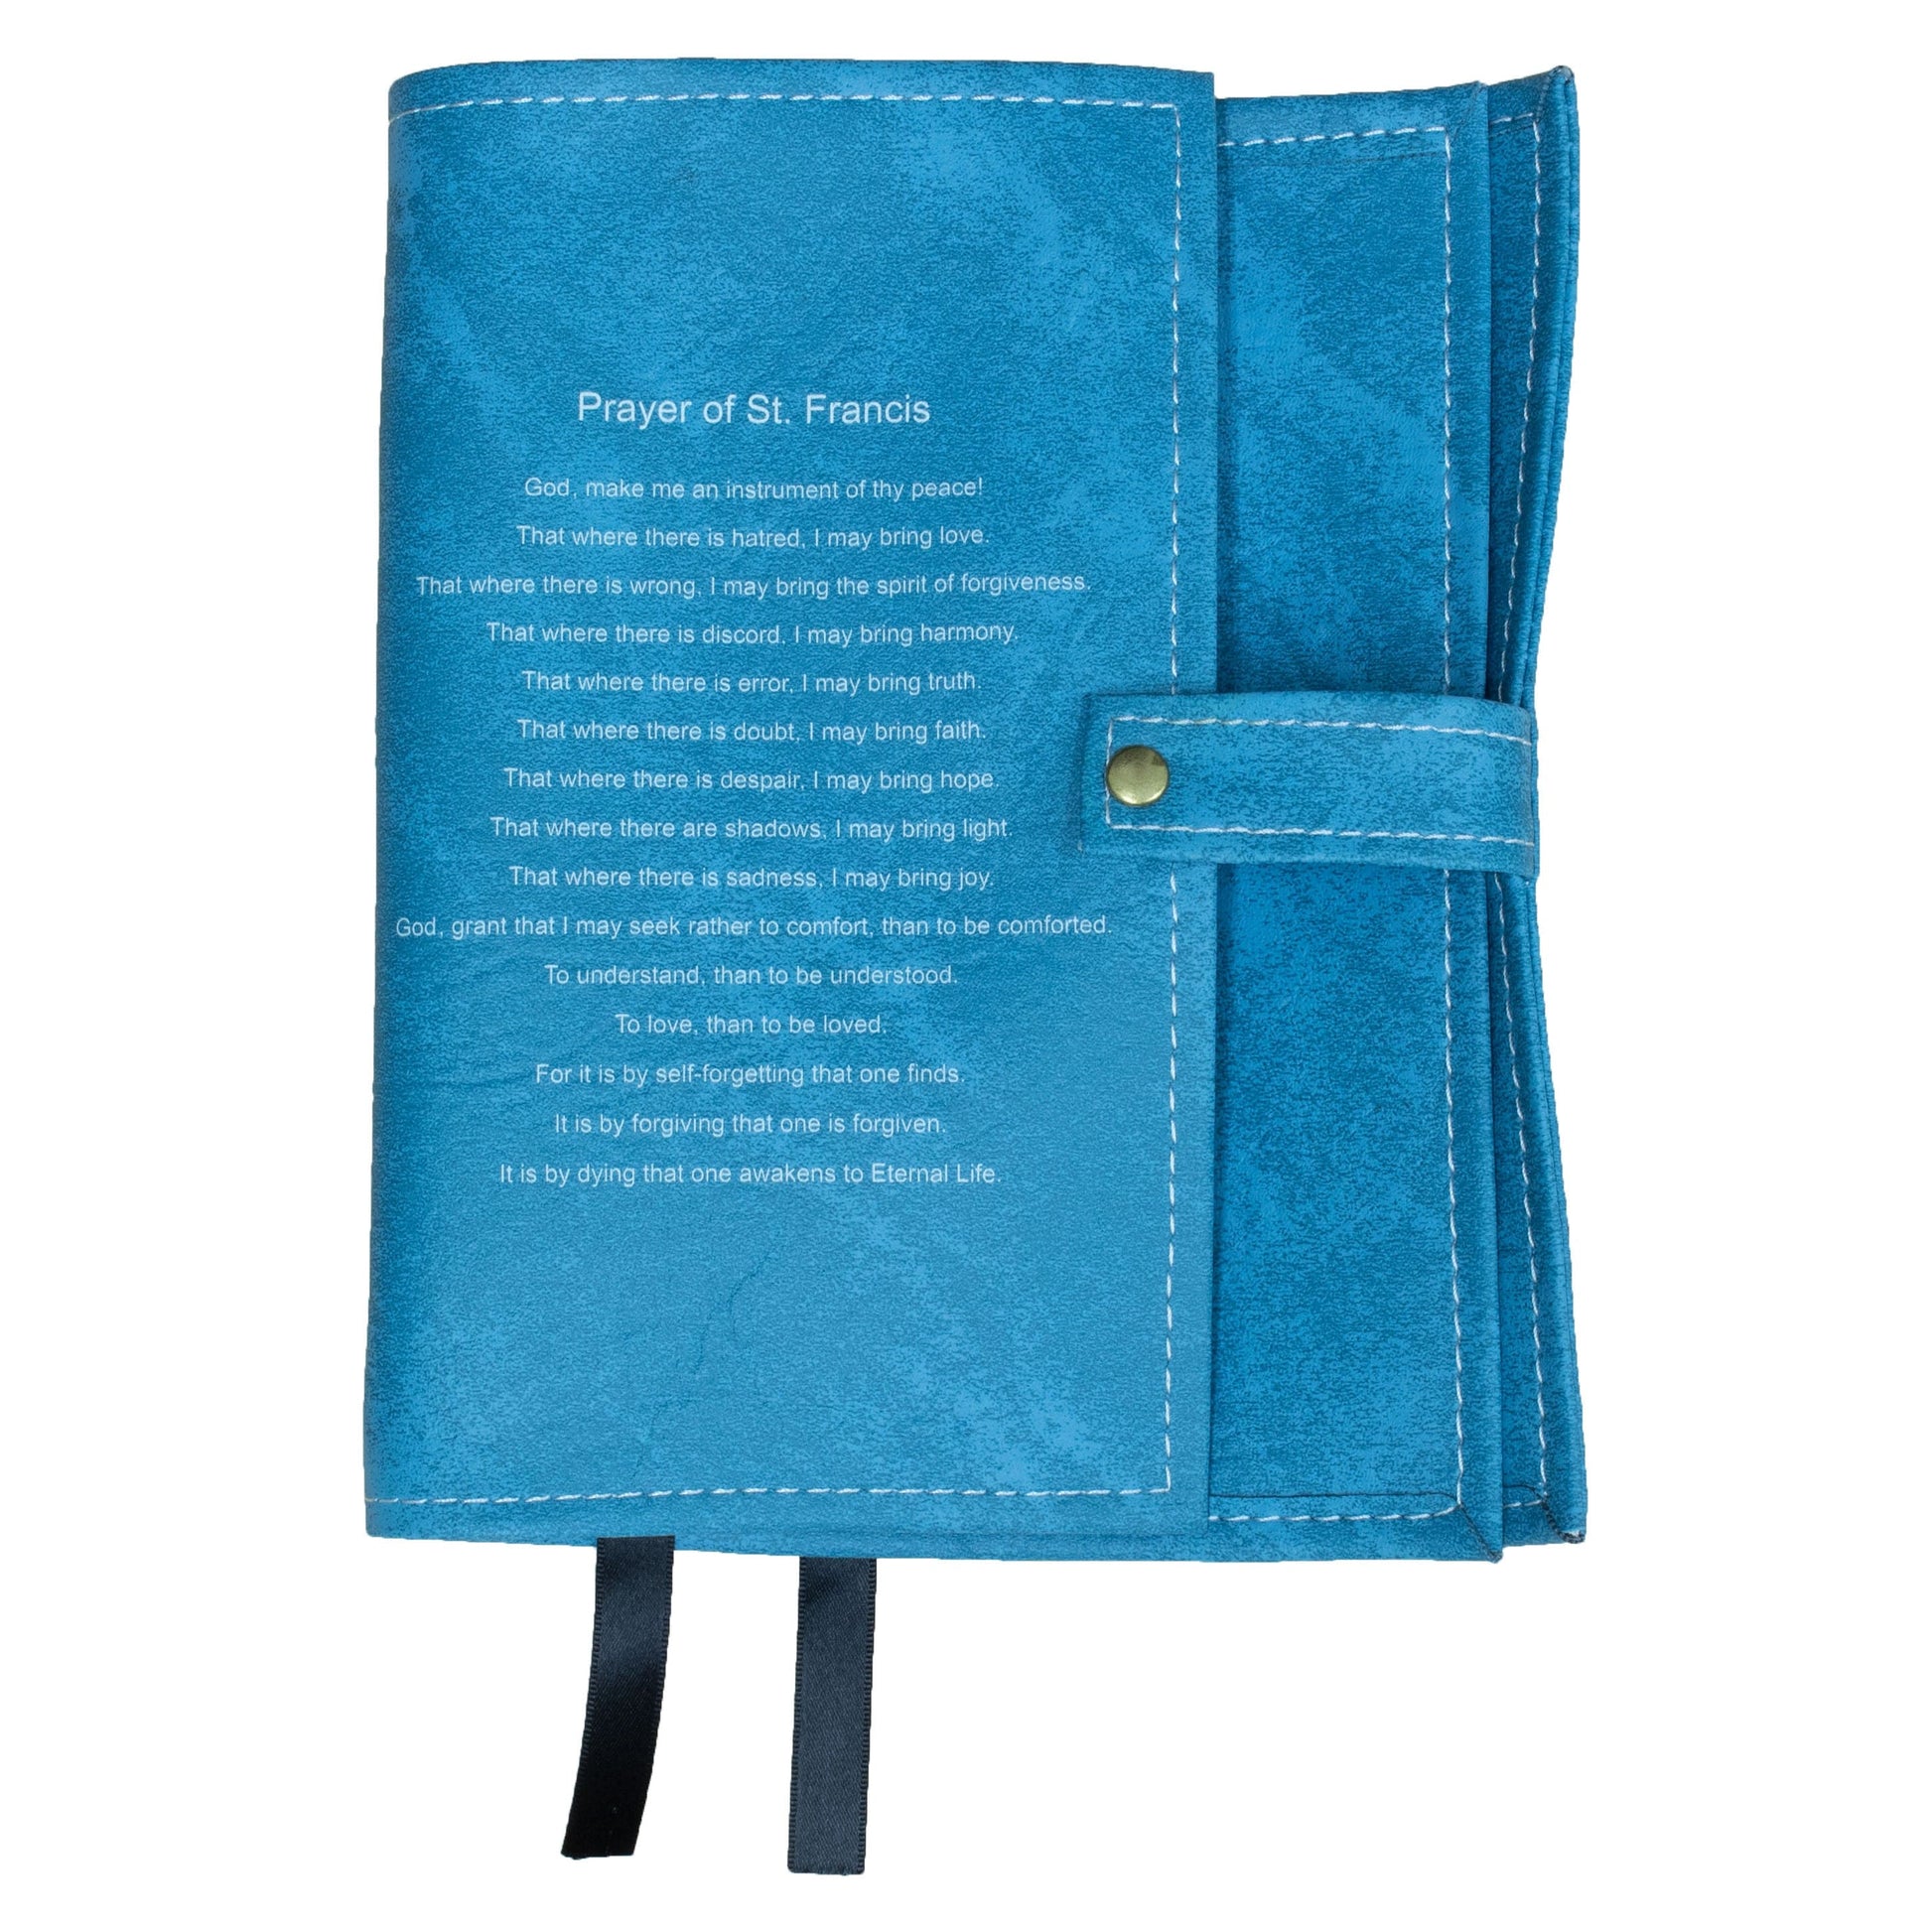 St. Francis Prayer Sky Blue Double Book Cover